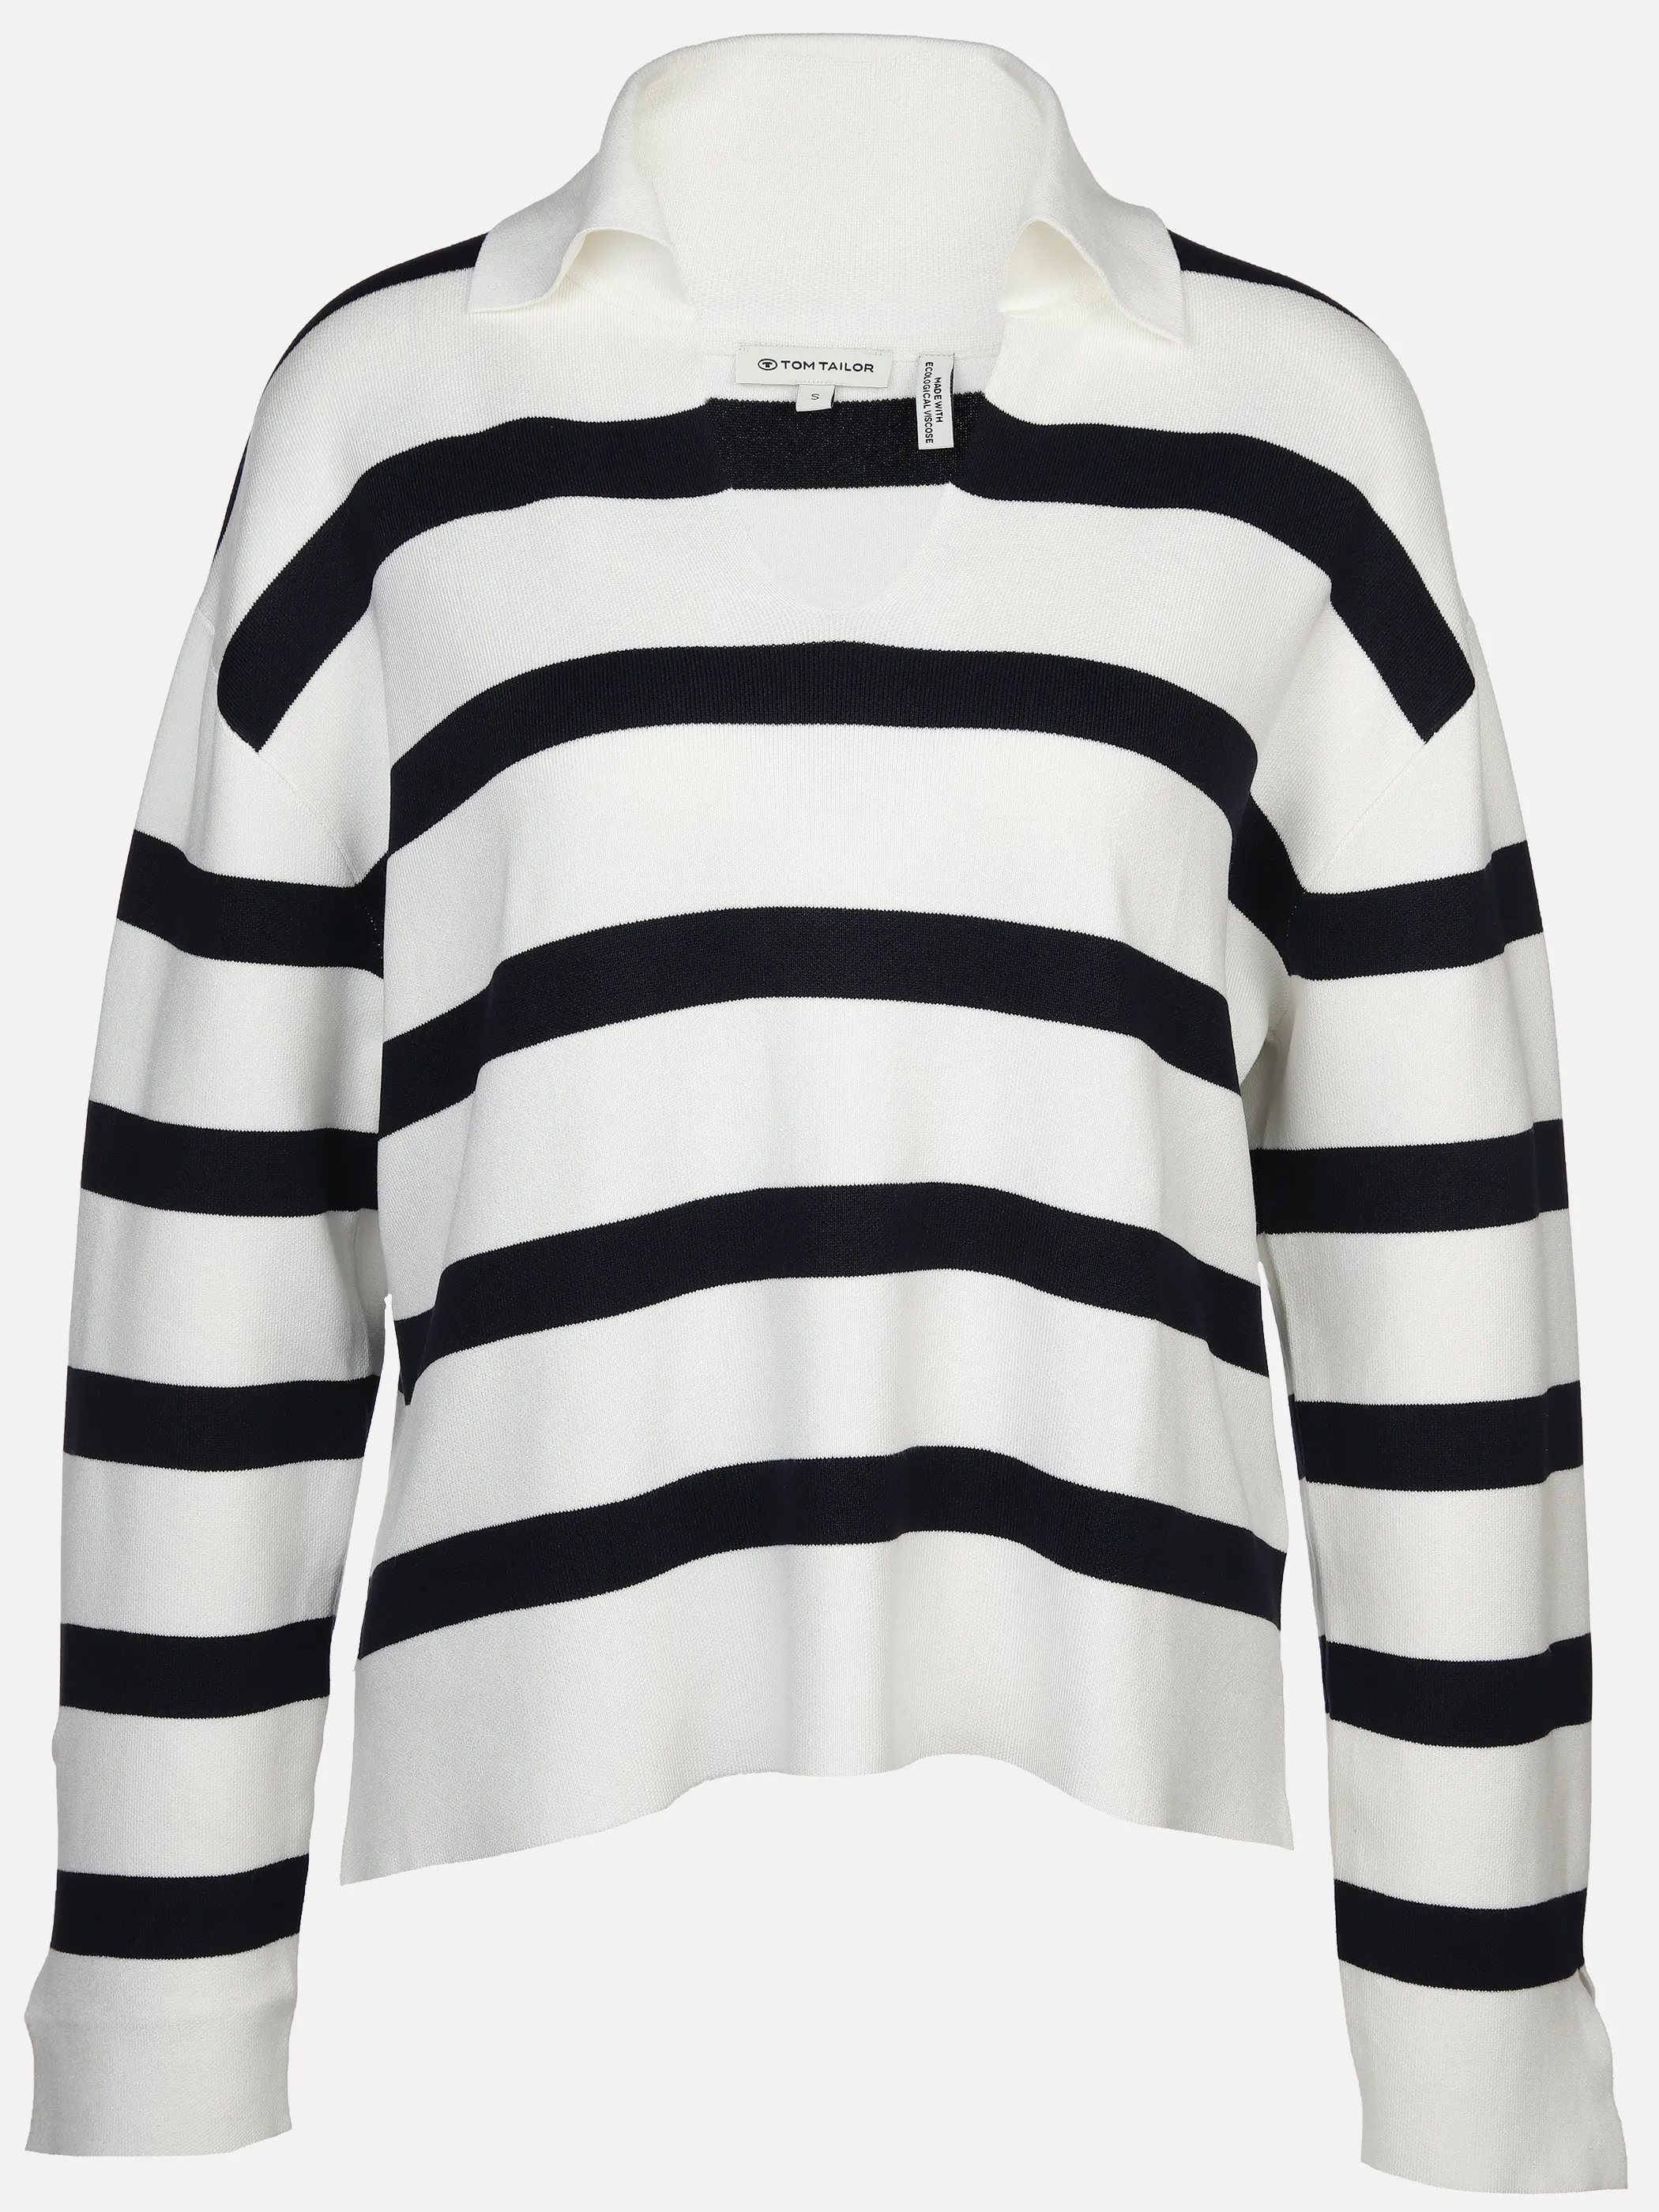 Tom Tailor 1040998 knit pullover striped Weiß 890592 35067 1